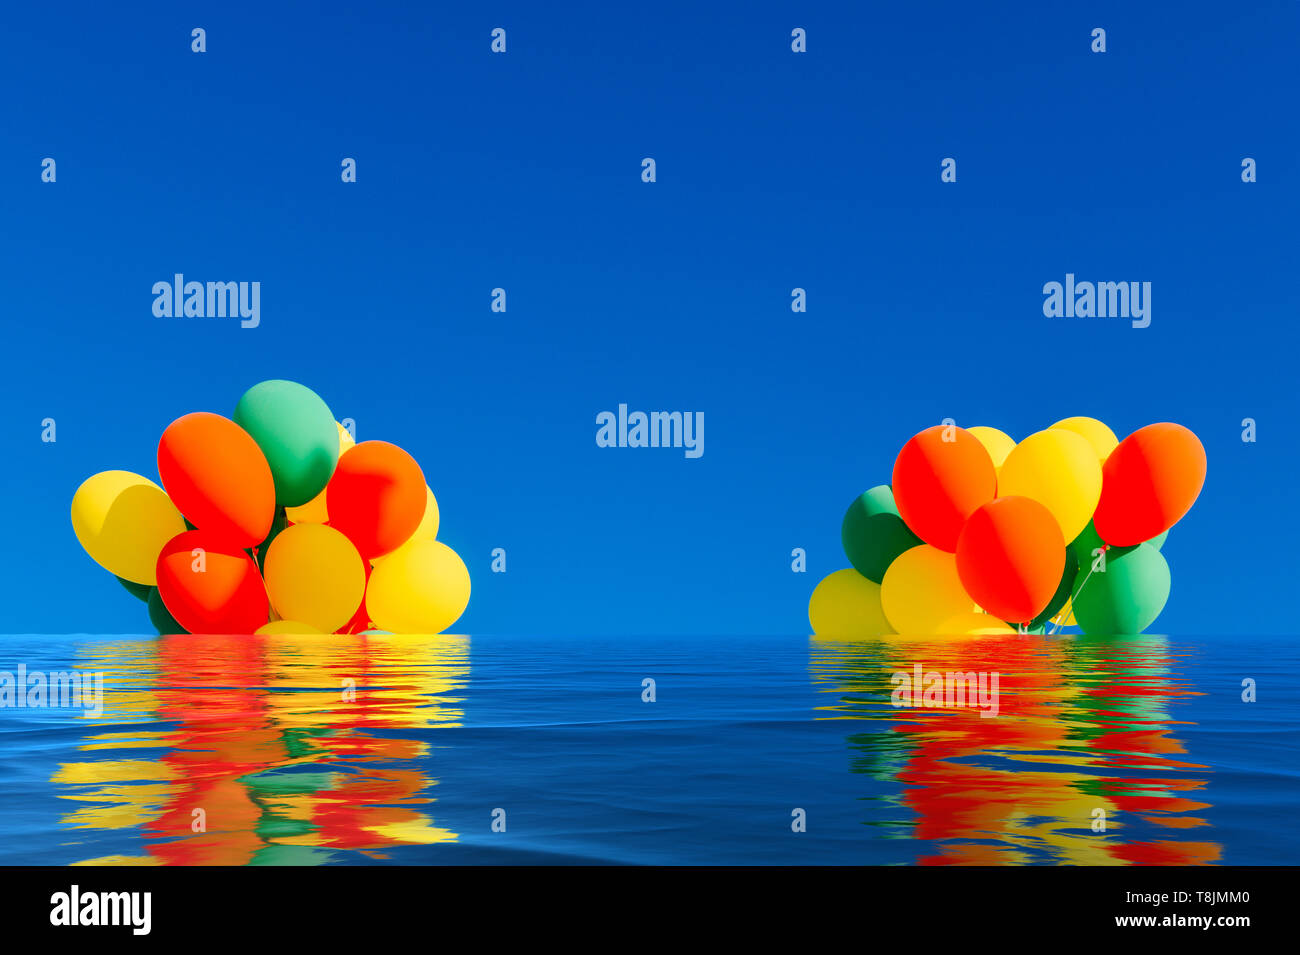 Flooded colorful balloons on a blue sky background with reflection on water. Stock Photo